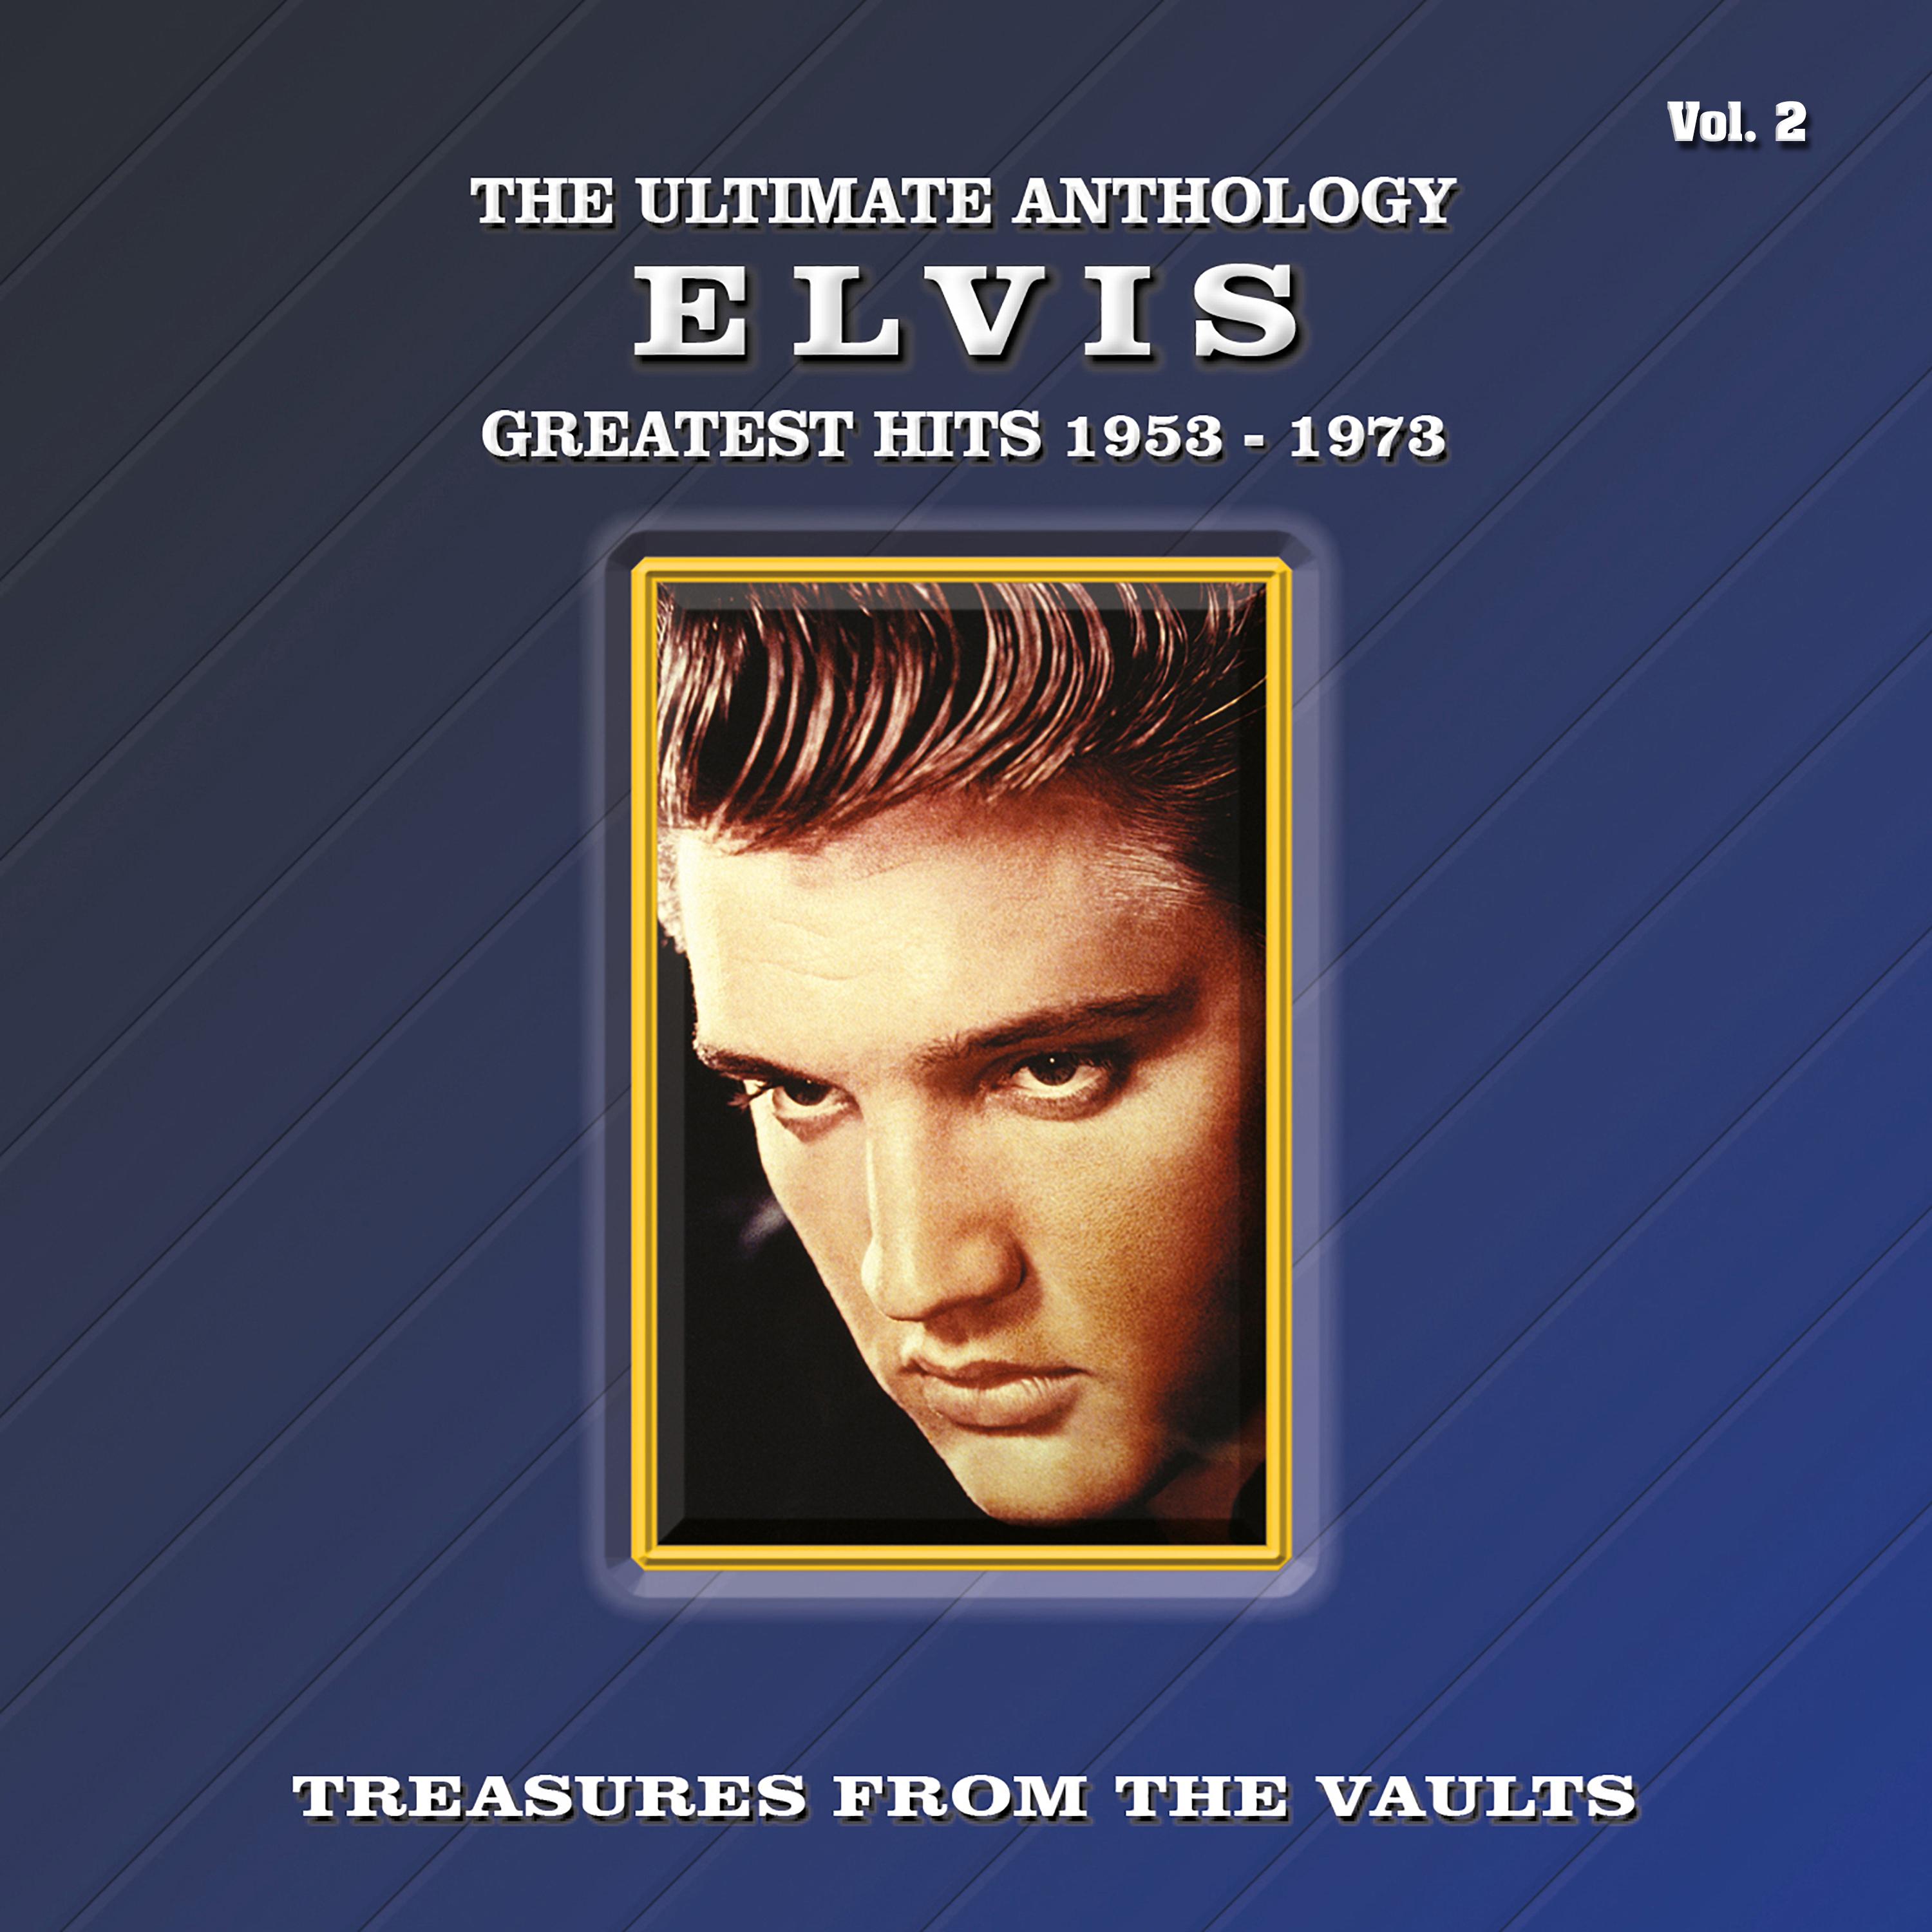 The Ultimate Anthology - Greatest Hits 1953-1973, Vol. 2